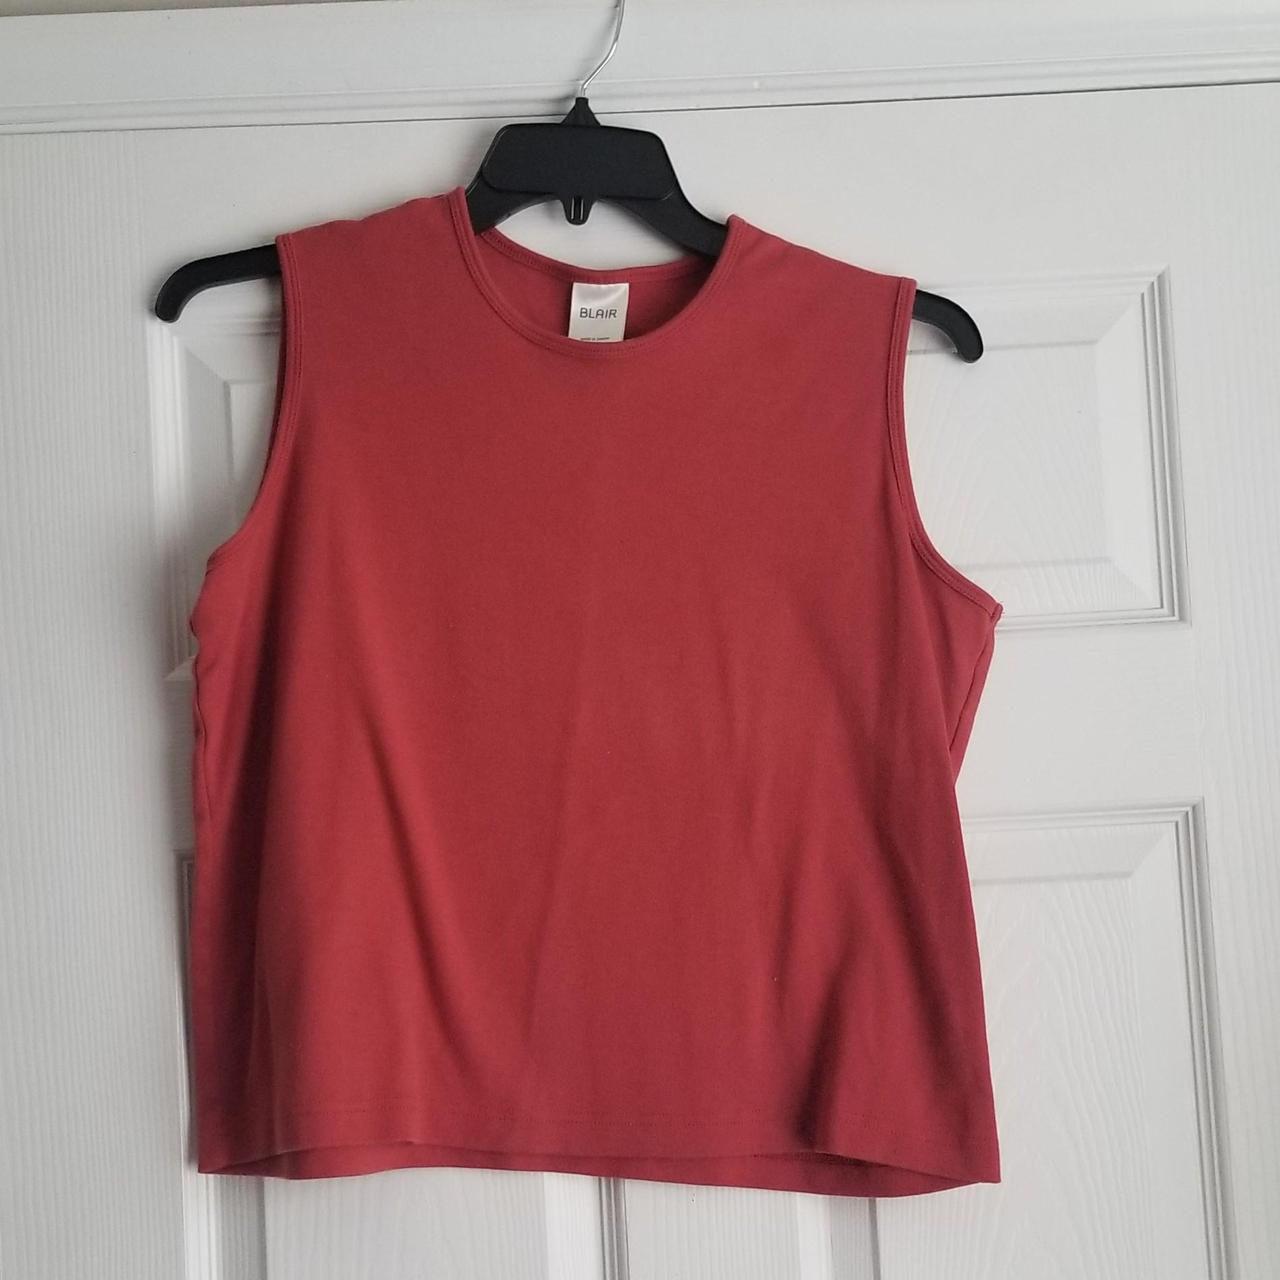 item listed by sheilahcloset